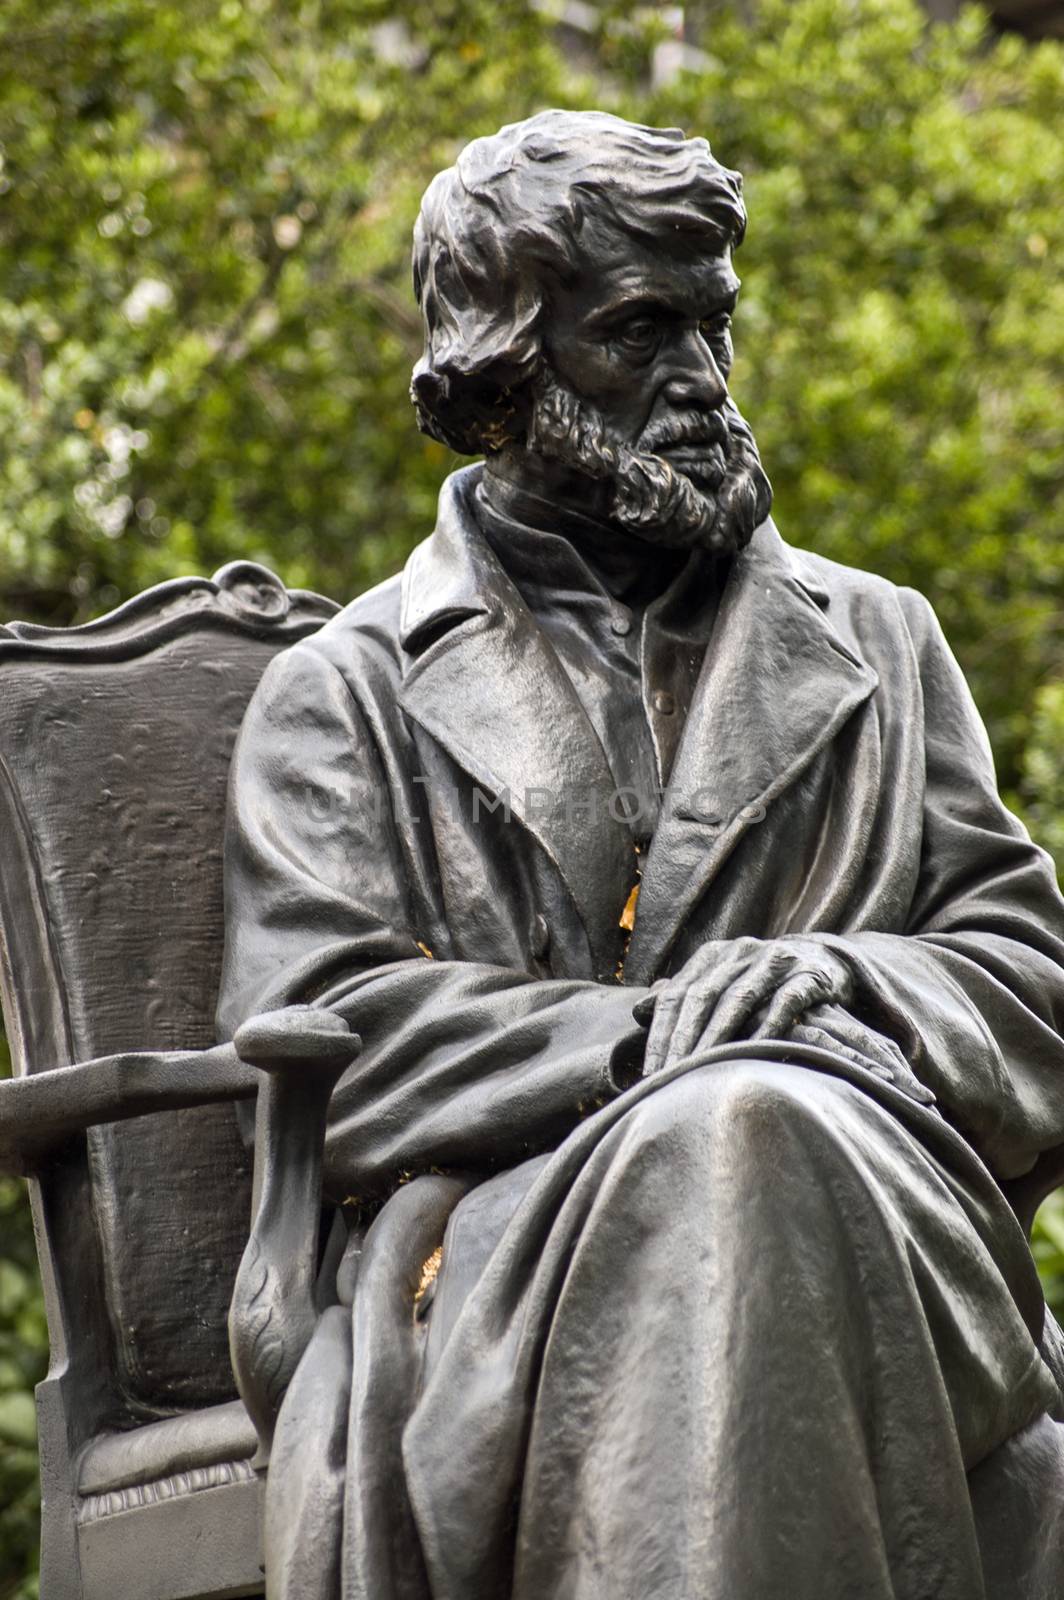 Thomas Carlyle statue, London by BasPhoto